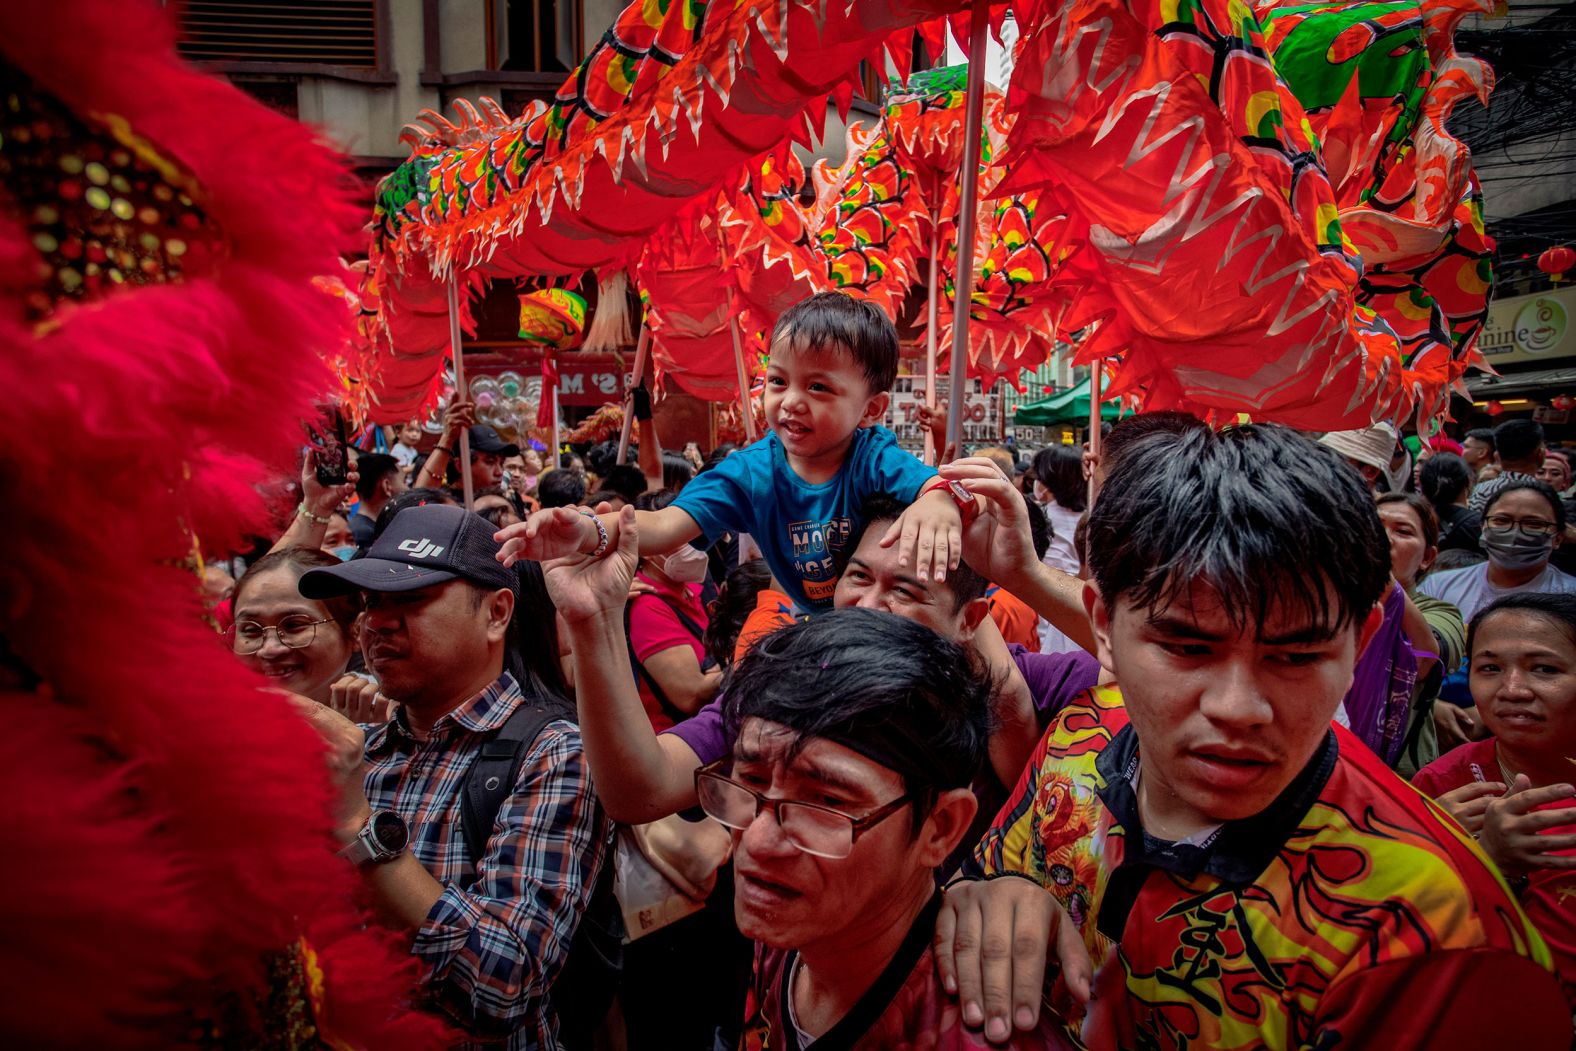 People celebrate Lunar New Year in Manila, Philippines, on Saturday, February 10. Millions of people across the world are celebrating Lunar New Year, which is widely considered the most treasured festival on the Chinese calendar.